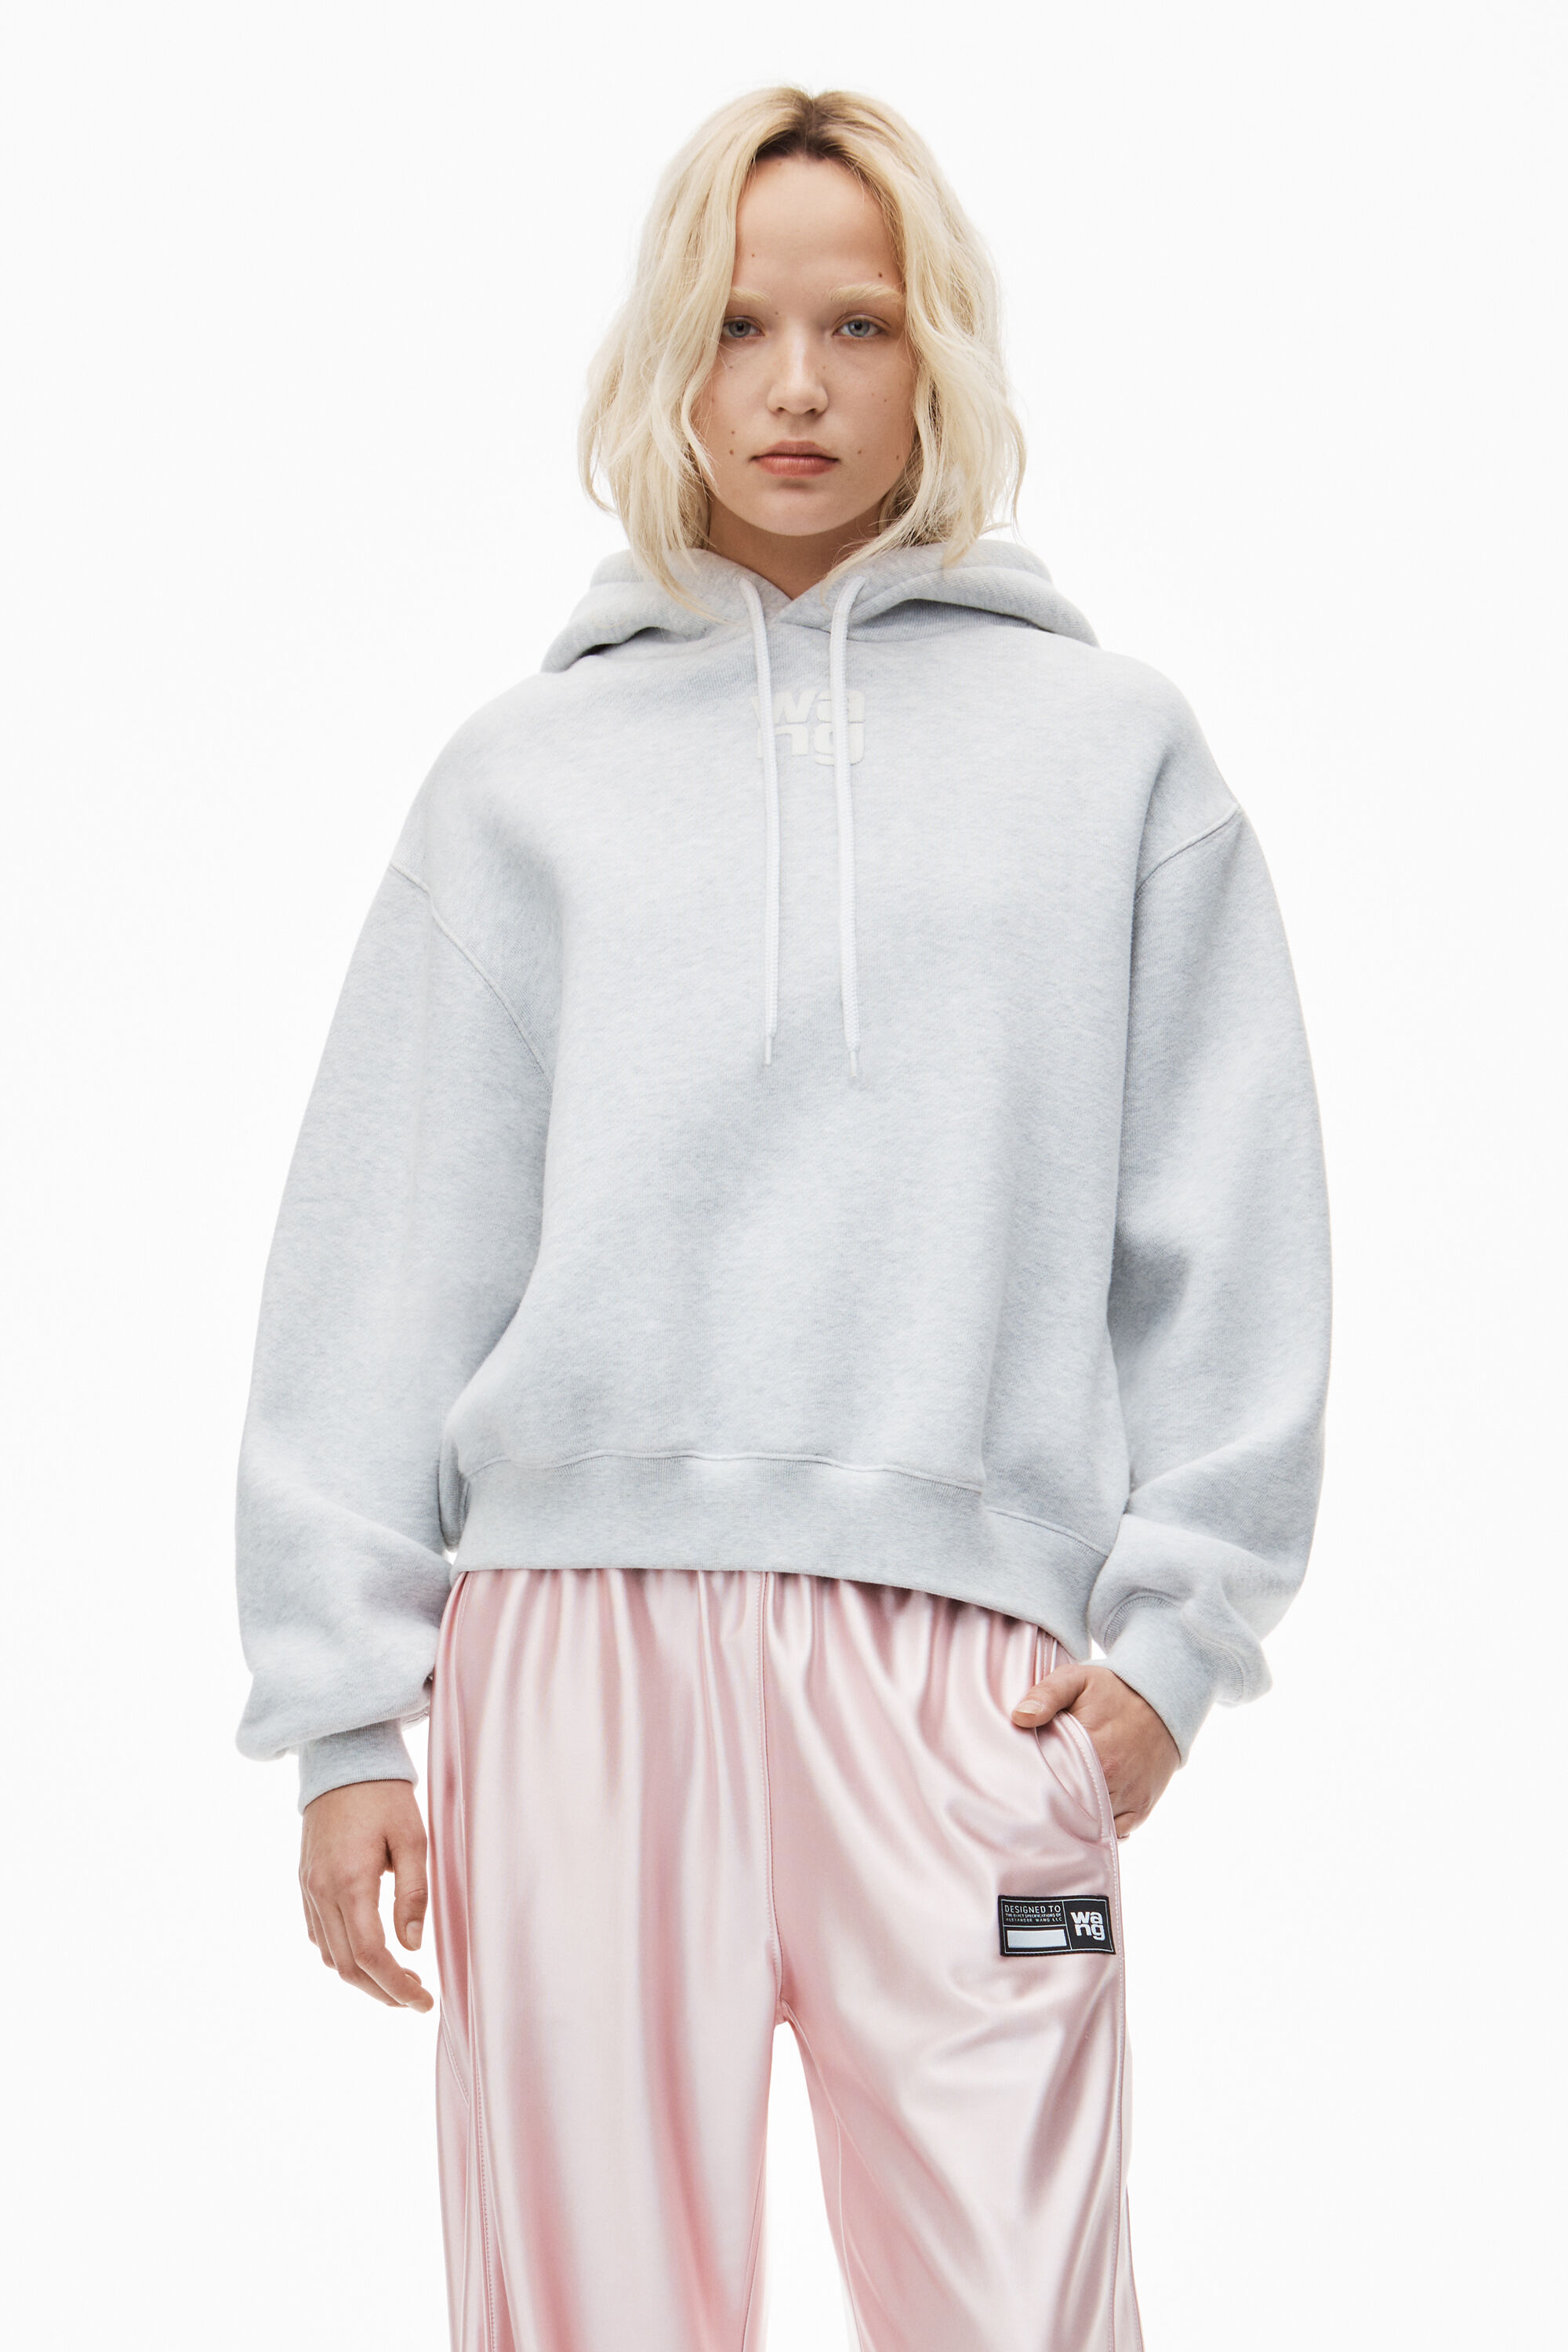 PUFF LOGO HOODIE IN STRUCTURED TERRY in LIGHT HEATHER GREY 